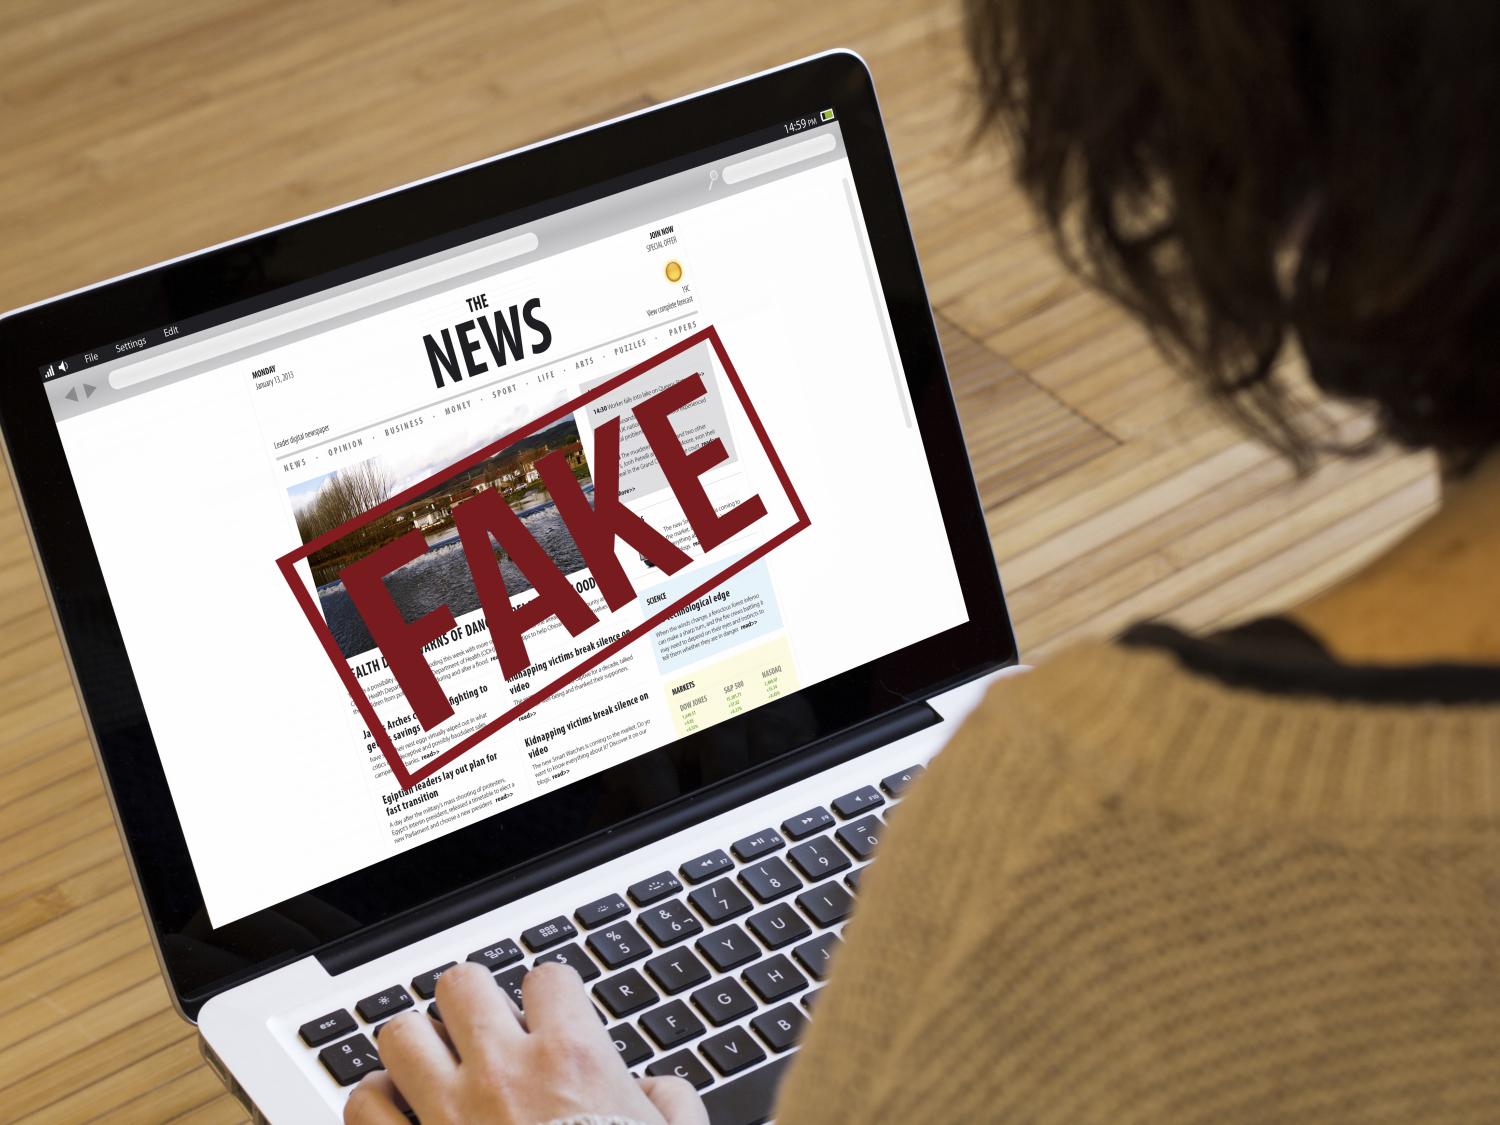 Tricking fake news detectors with malicious user comments